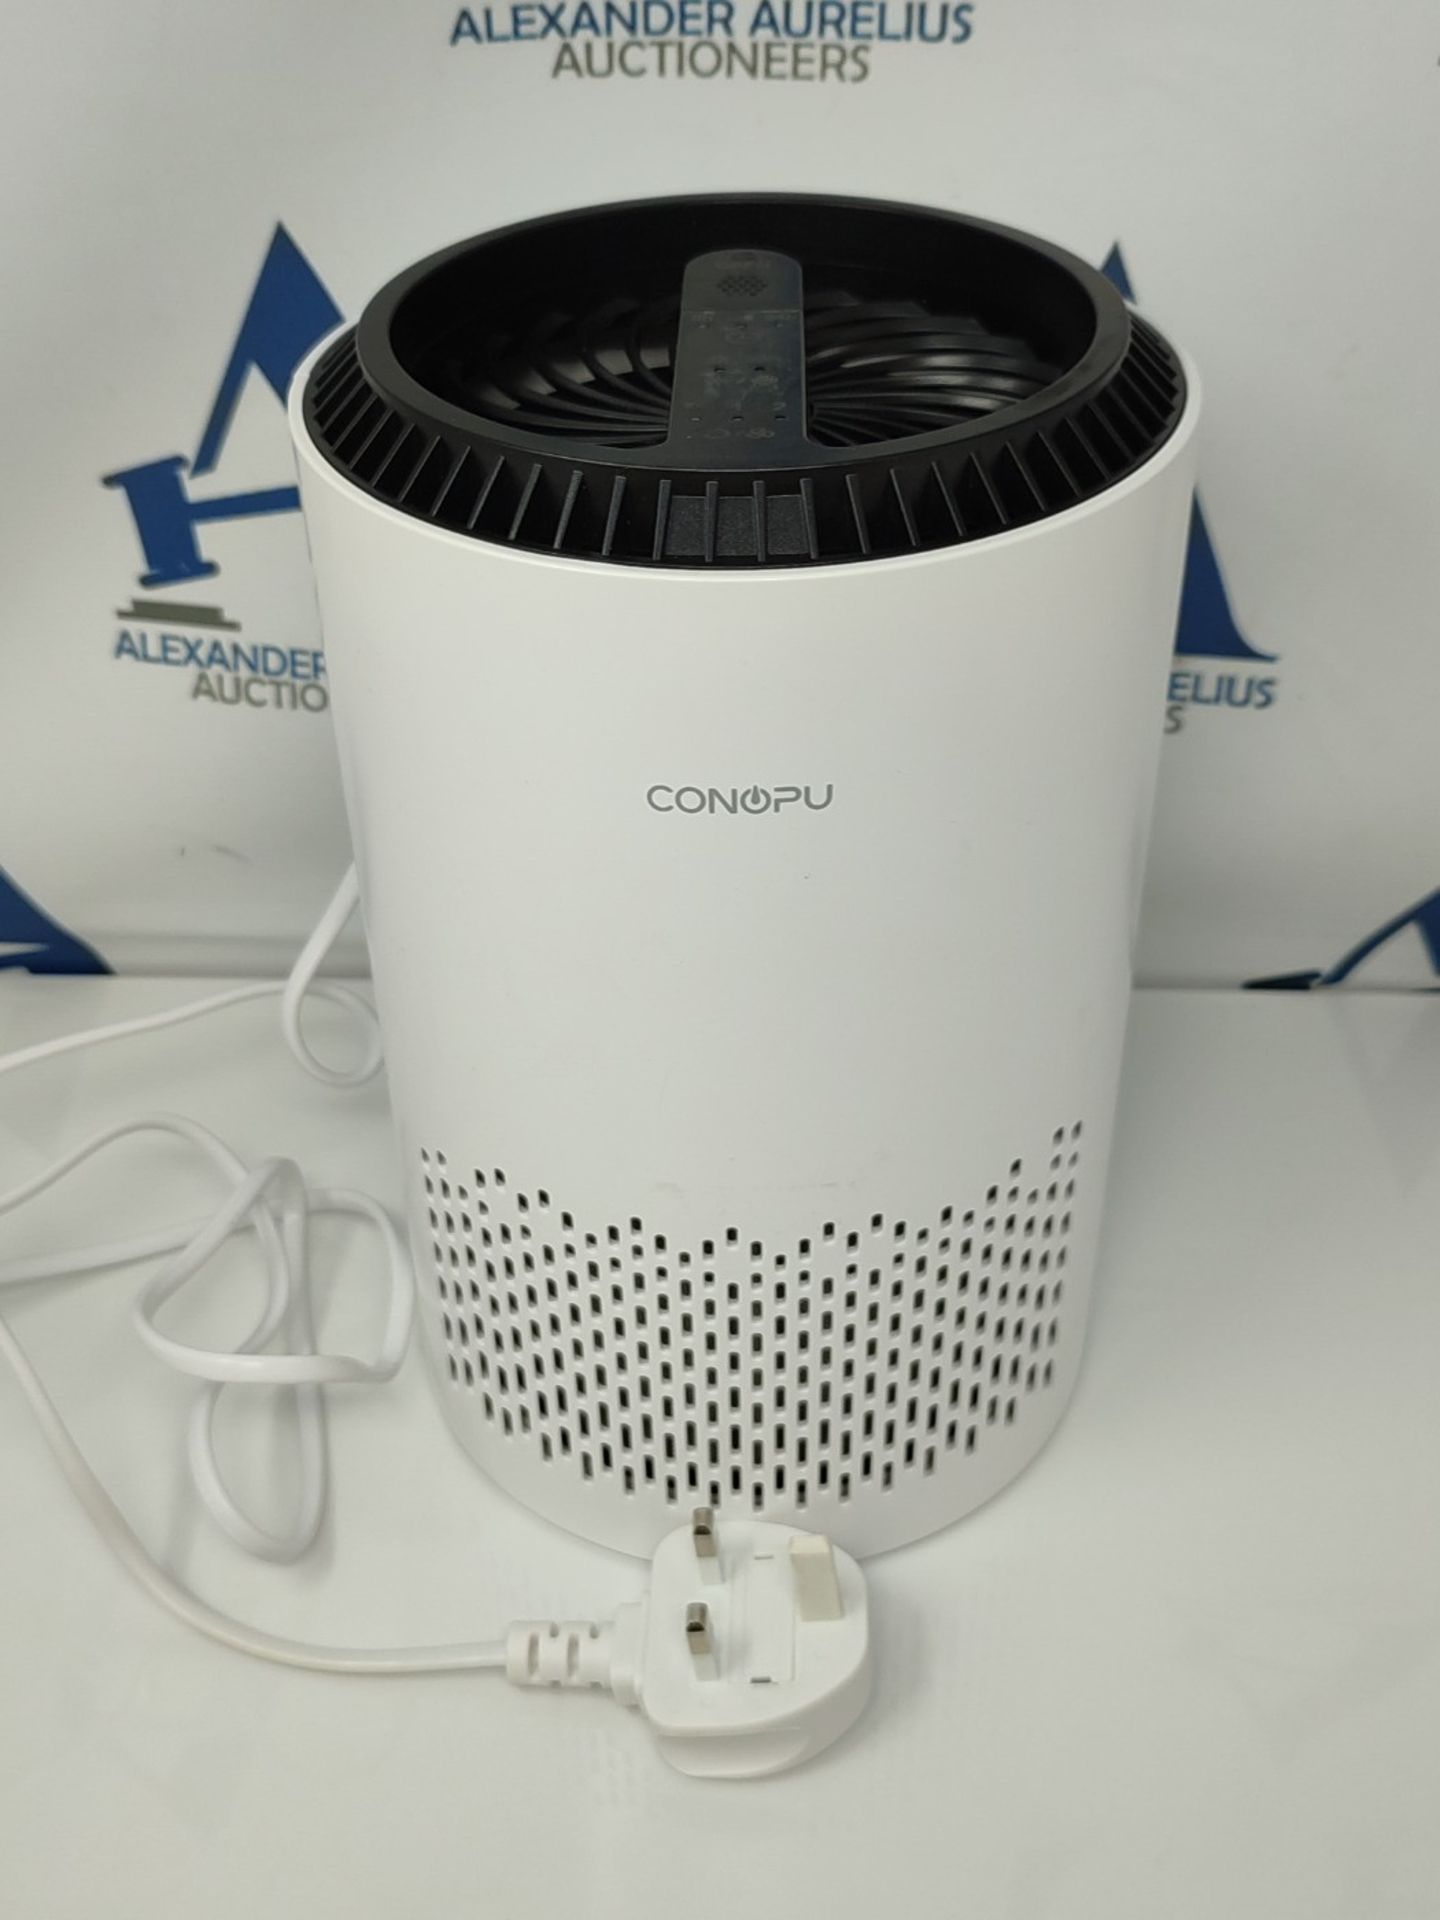 CONOPU Air Purifier for Home Bedroom with Hepa H13 99.97% Filter, Air Cleaner portable - Bild 3 aus 3